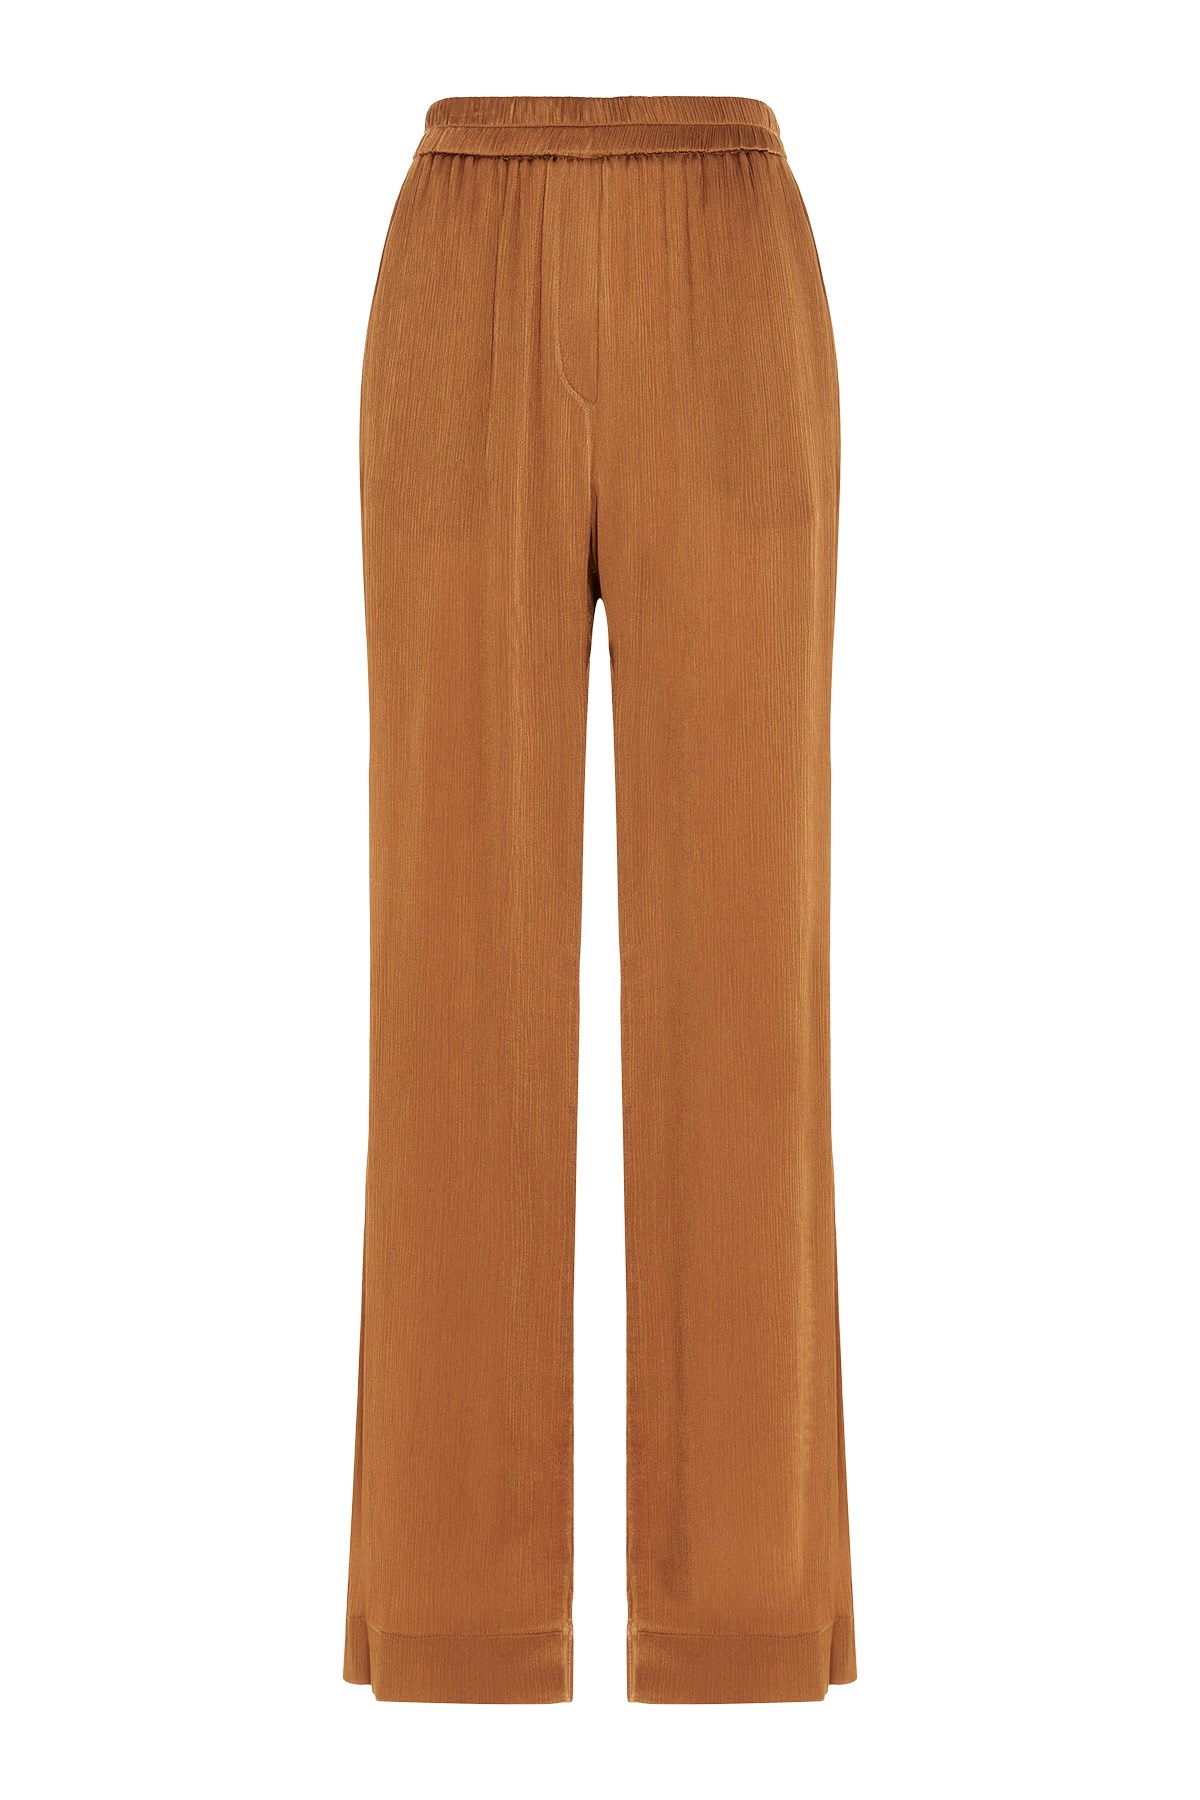 NUDE Micro Pleated Trousers